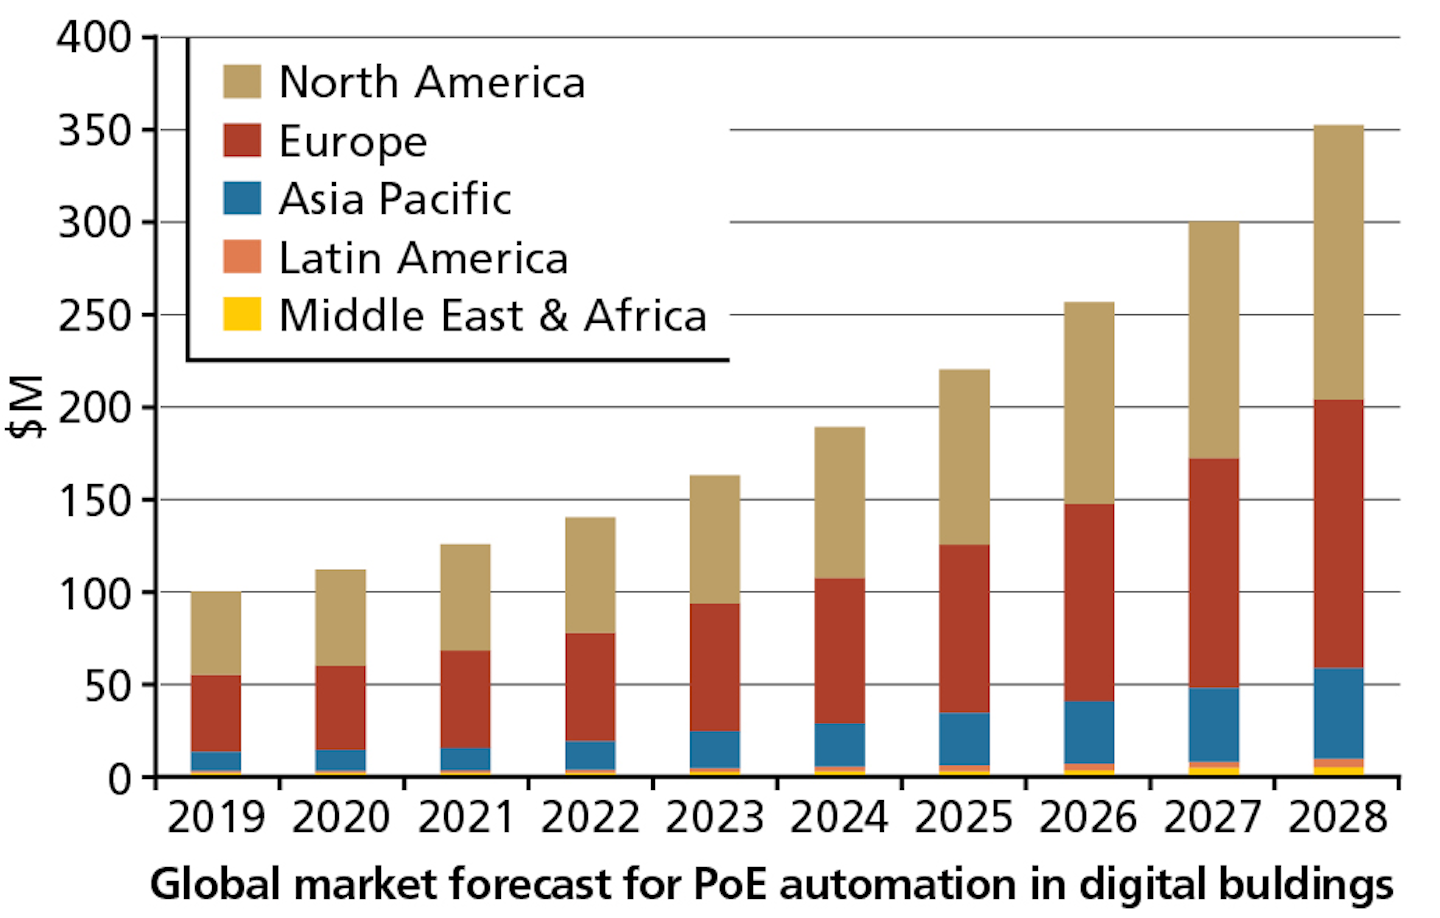 FIG. 3. Navigant forecasts PoE building automation revenue by region, with a global revenue of $352.9M in 2028, from $101.5M in 2019. Image credit: Illustration courtesy of Navigant Research.